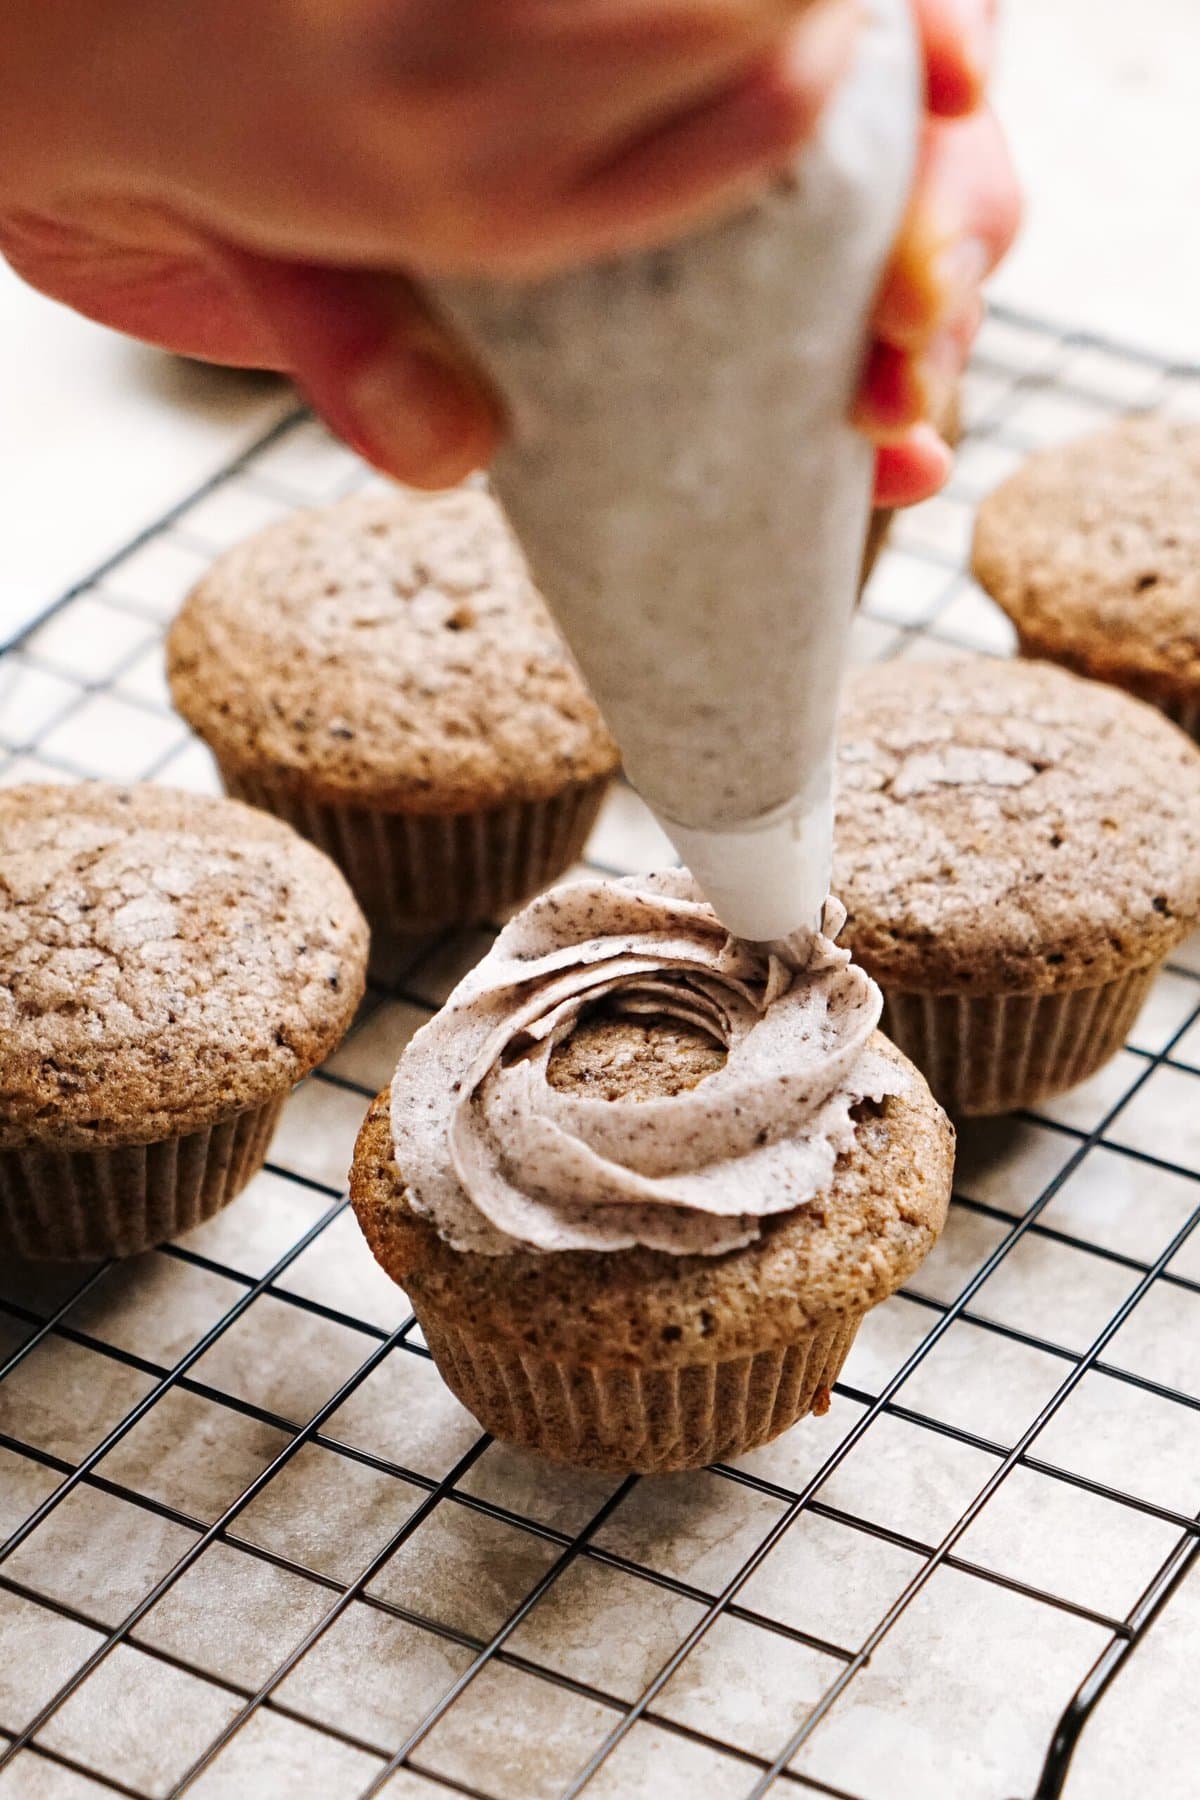 A hand is piping frosting onto a muffin with a piping bag. Several unfrosted muffins are on a cooling rack in the background.